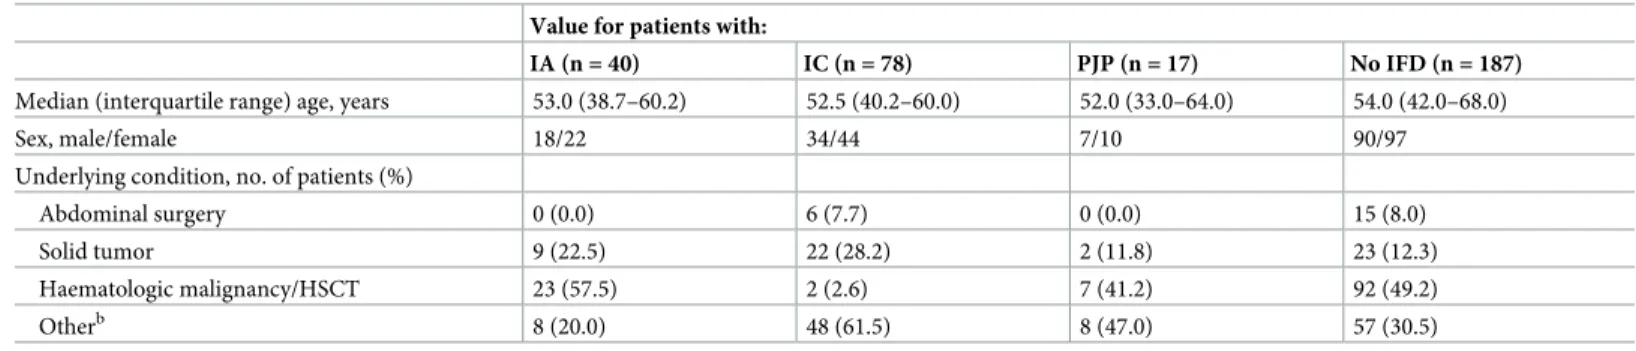 Table 1 shows demographics for the 322 patients from whom 322 serum samples were tested with two BDG assays (FA and GT), of which 78 samples were from proven IC (75 candidemia and 3 intraabdominal candidiasis) cases, 40 samples from probable IA (38 pulmona